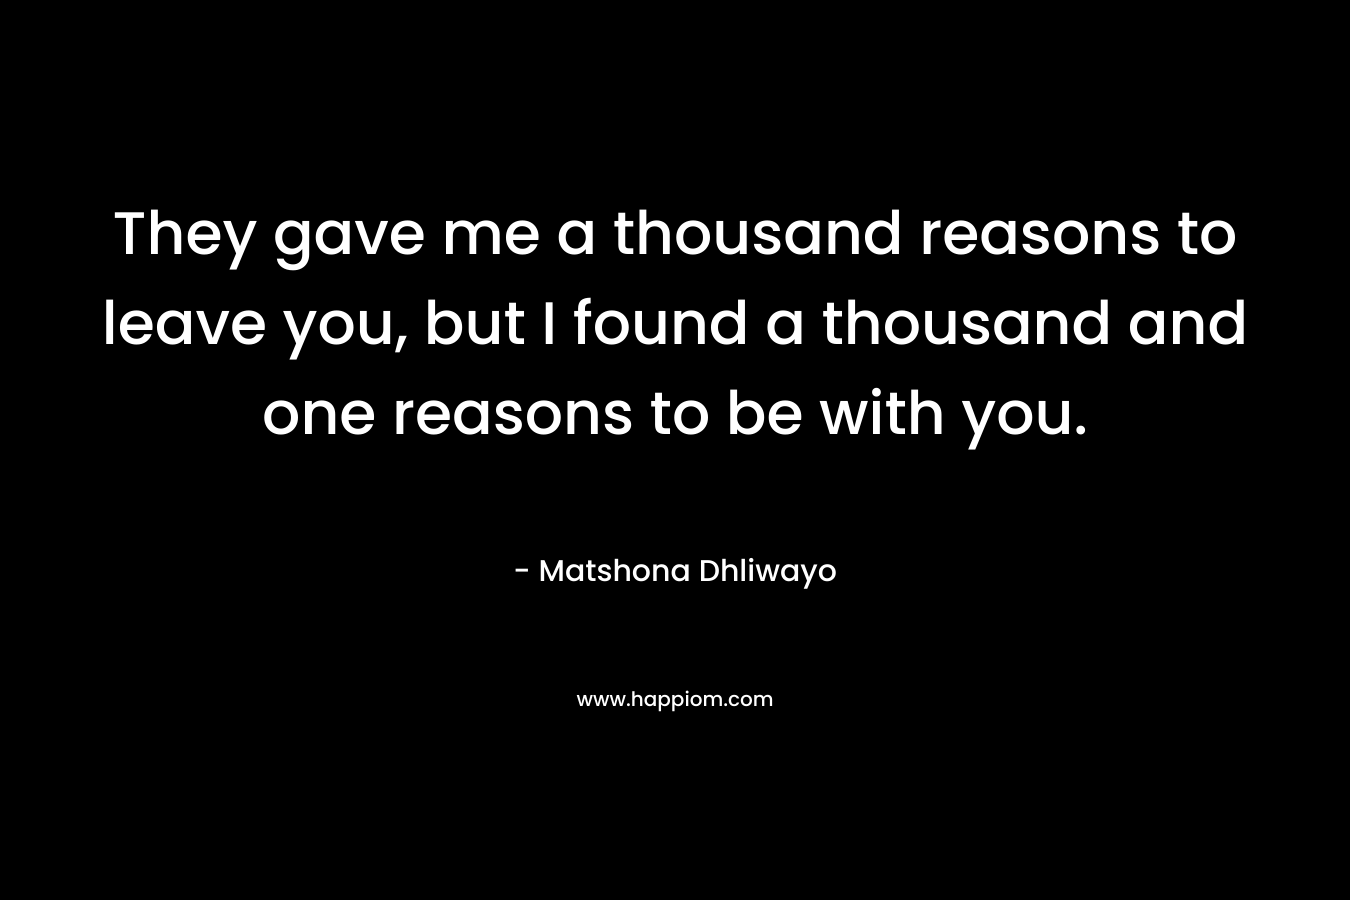 They gave me a thousand reasons to leave you, but I found a thousand and one reasons to be with you.